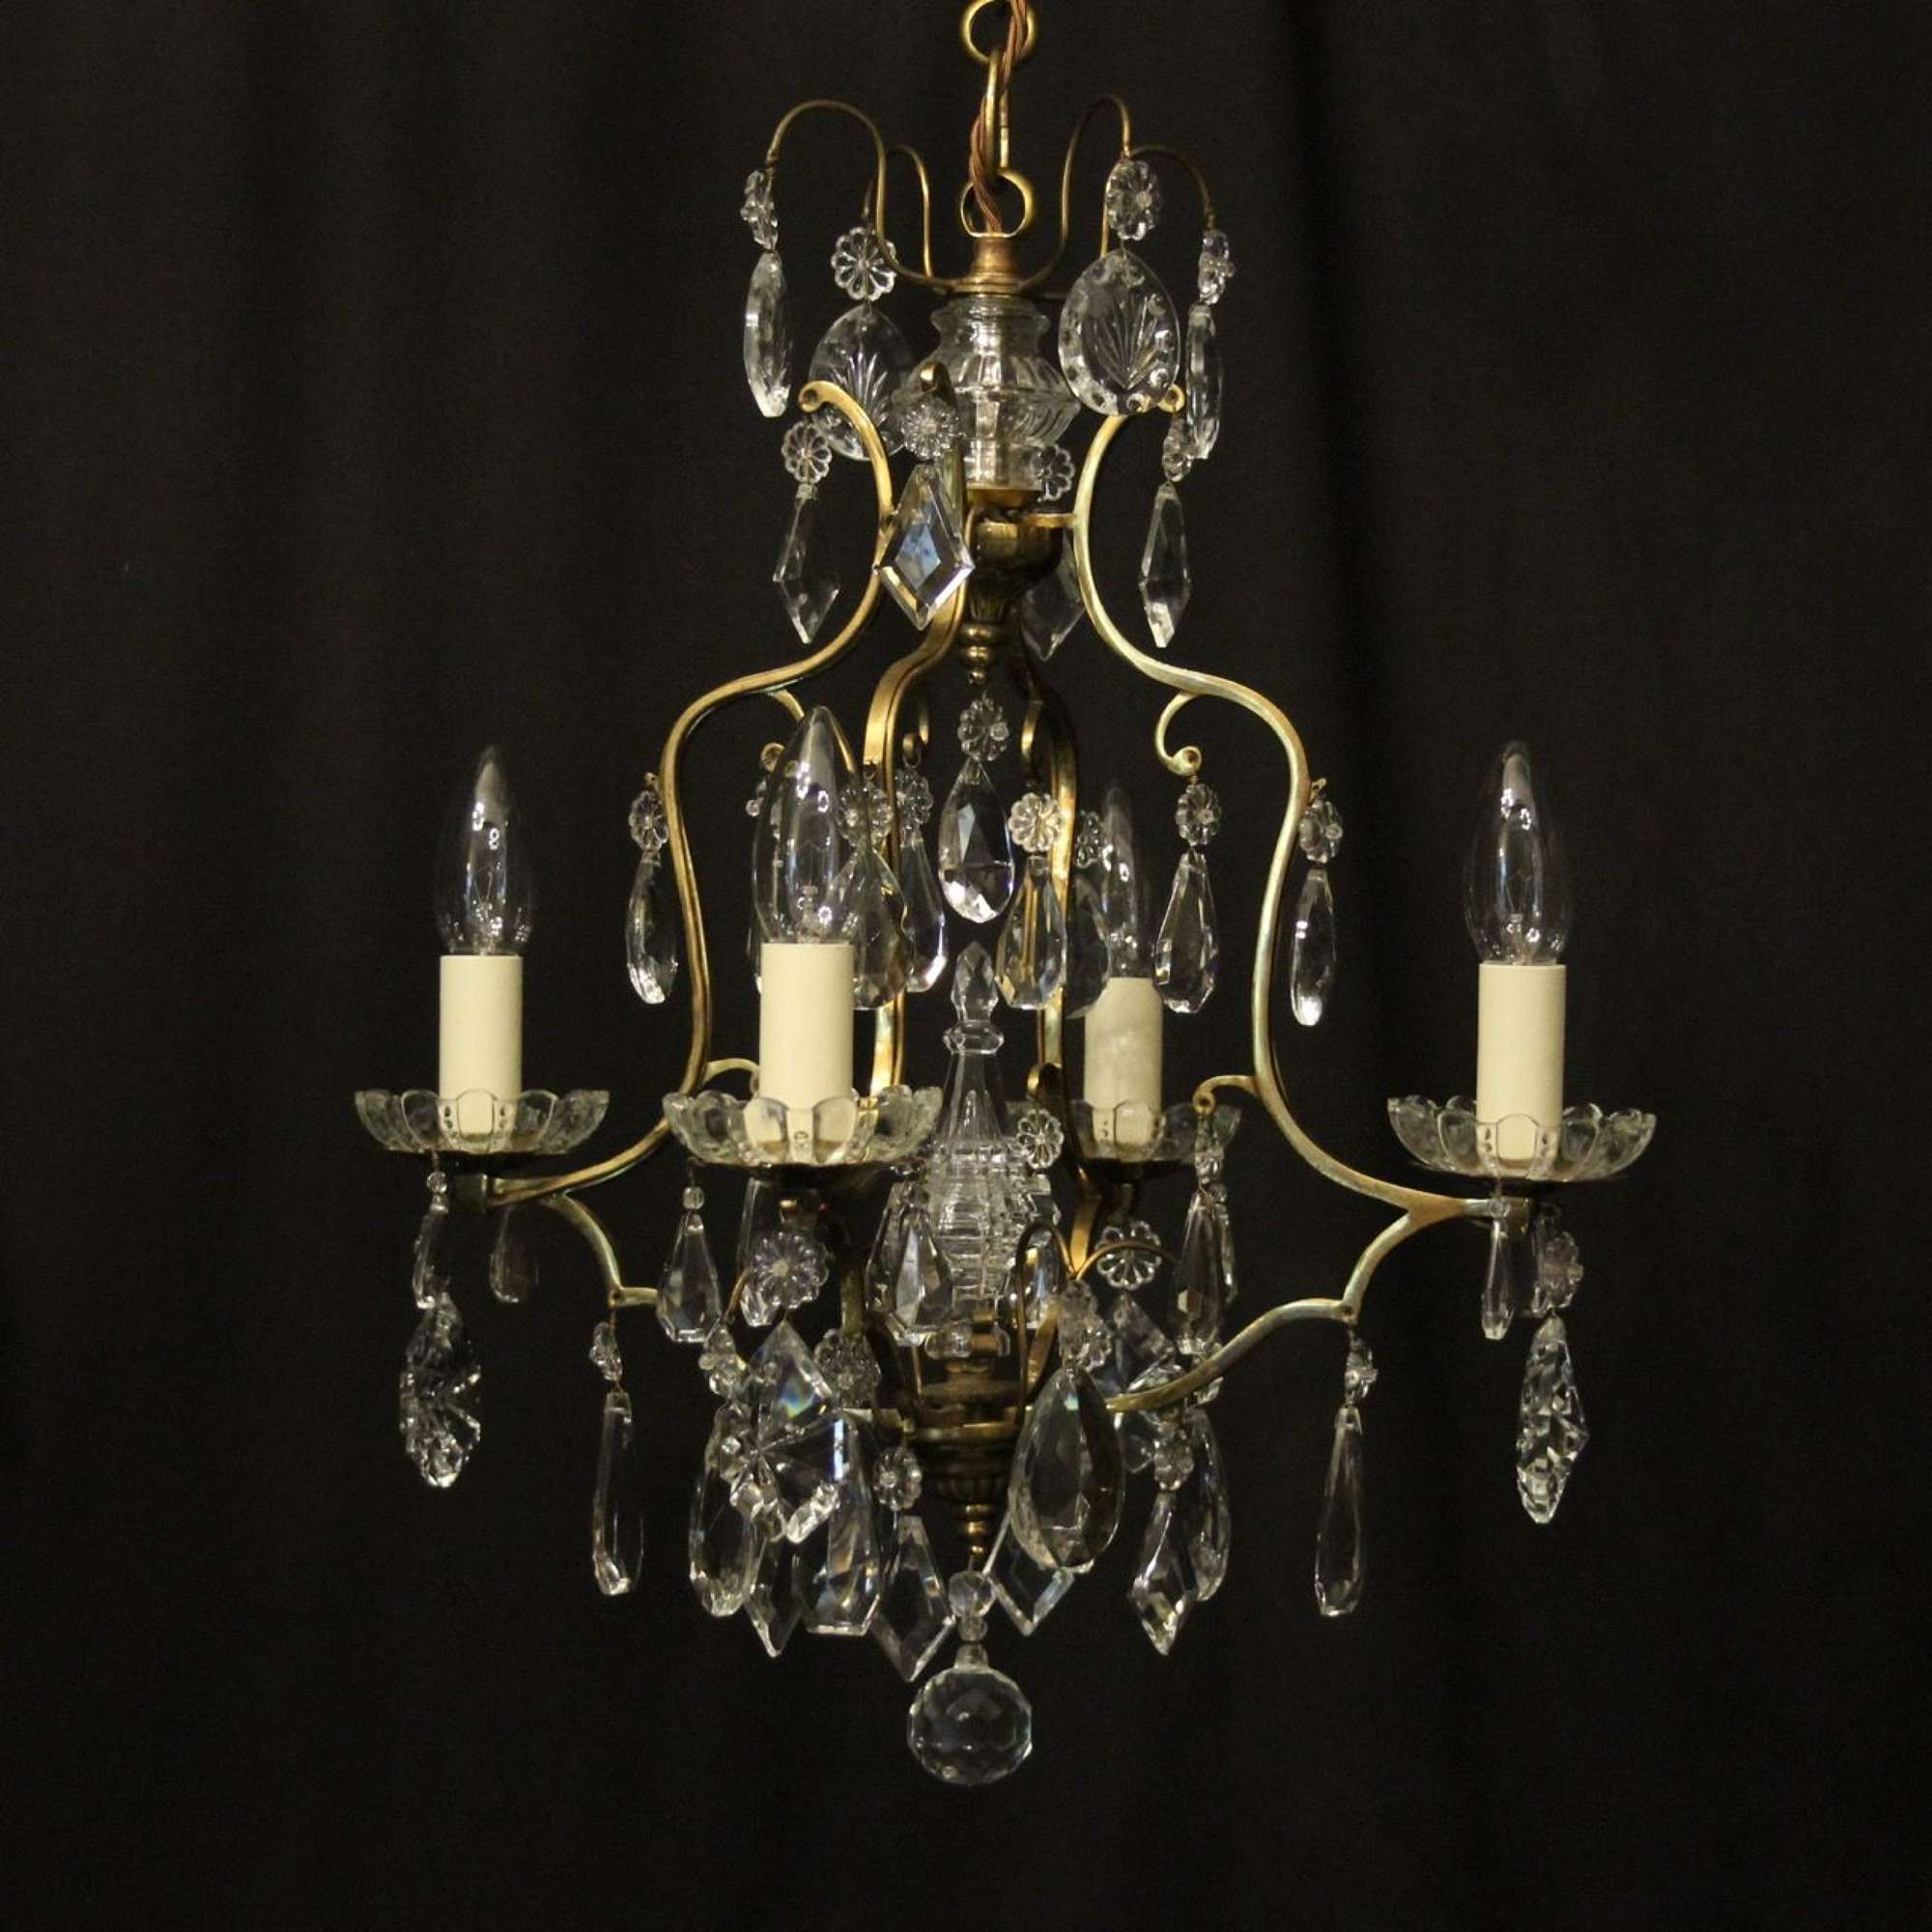 French Gilded 4 Light Cage Antique Chandelier